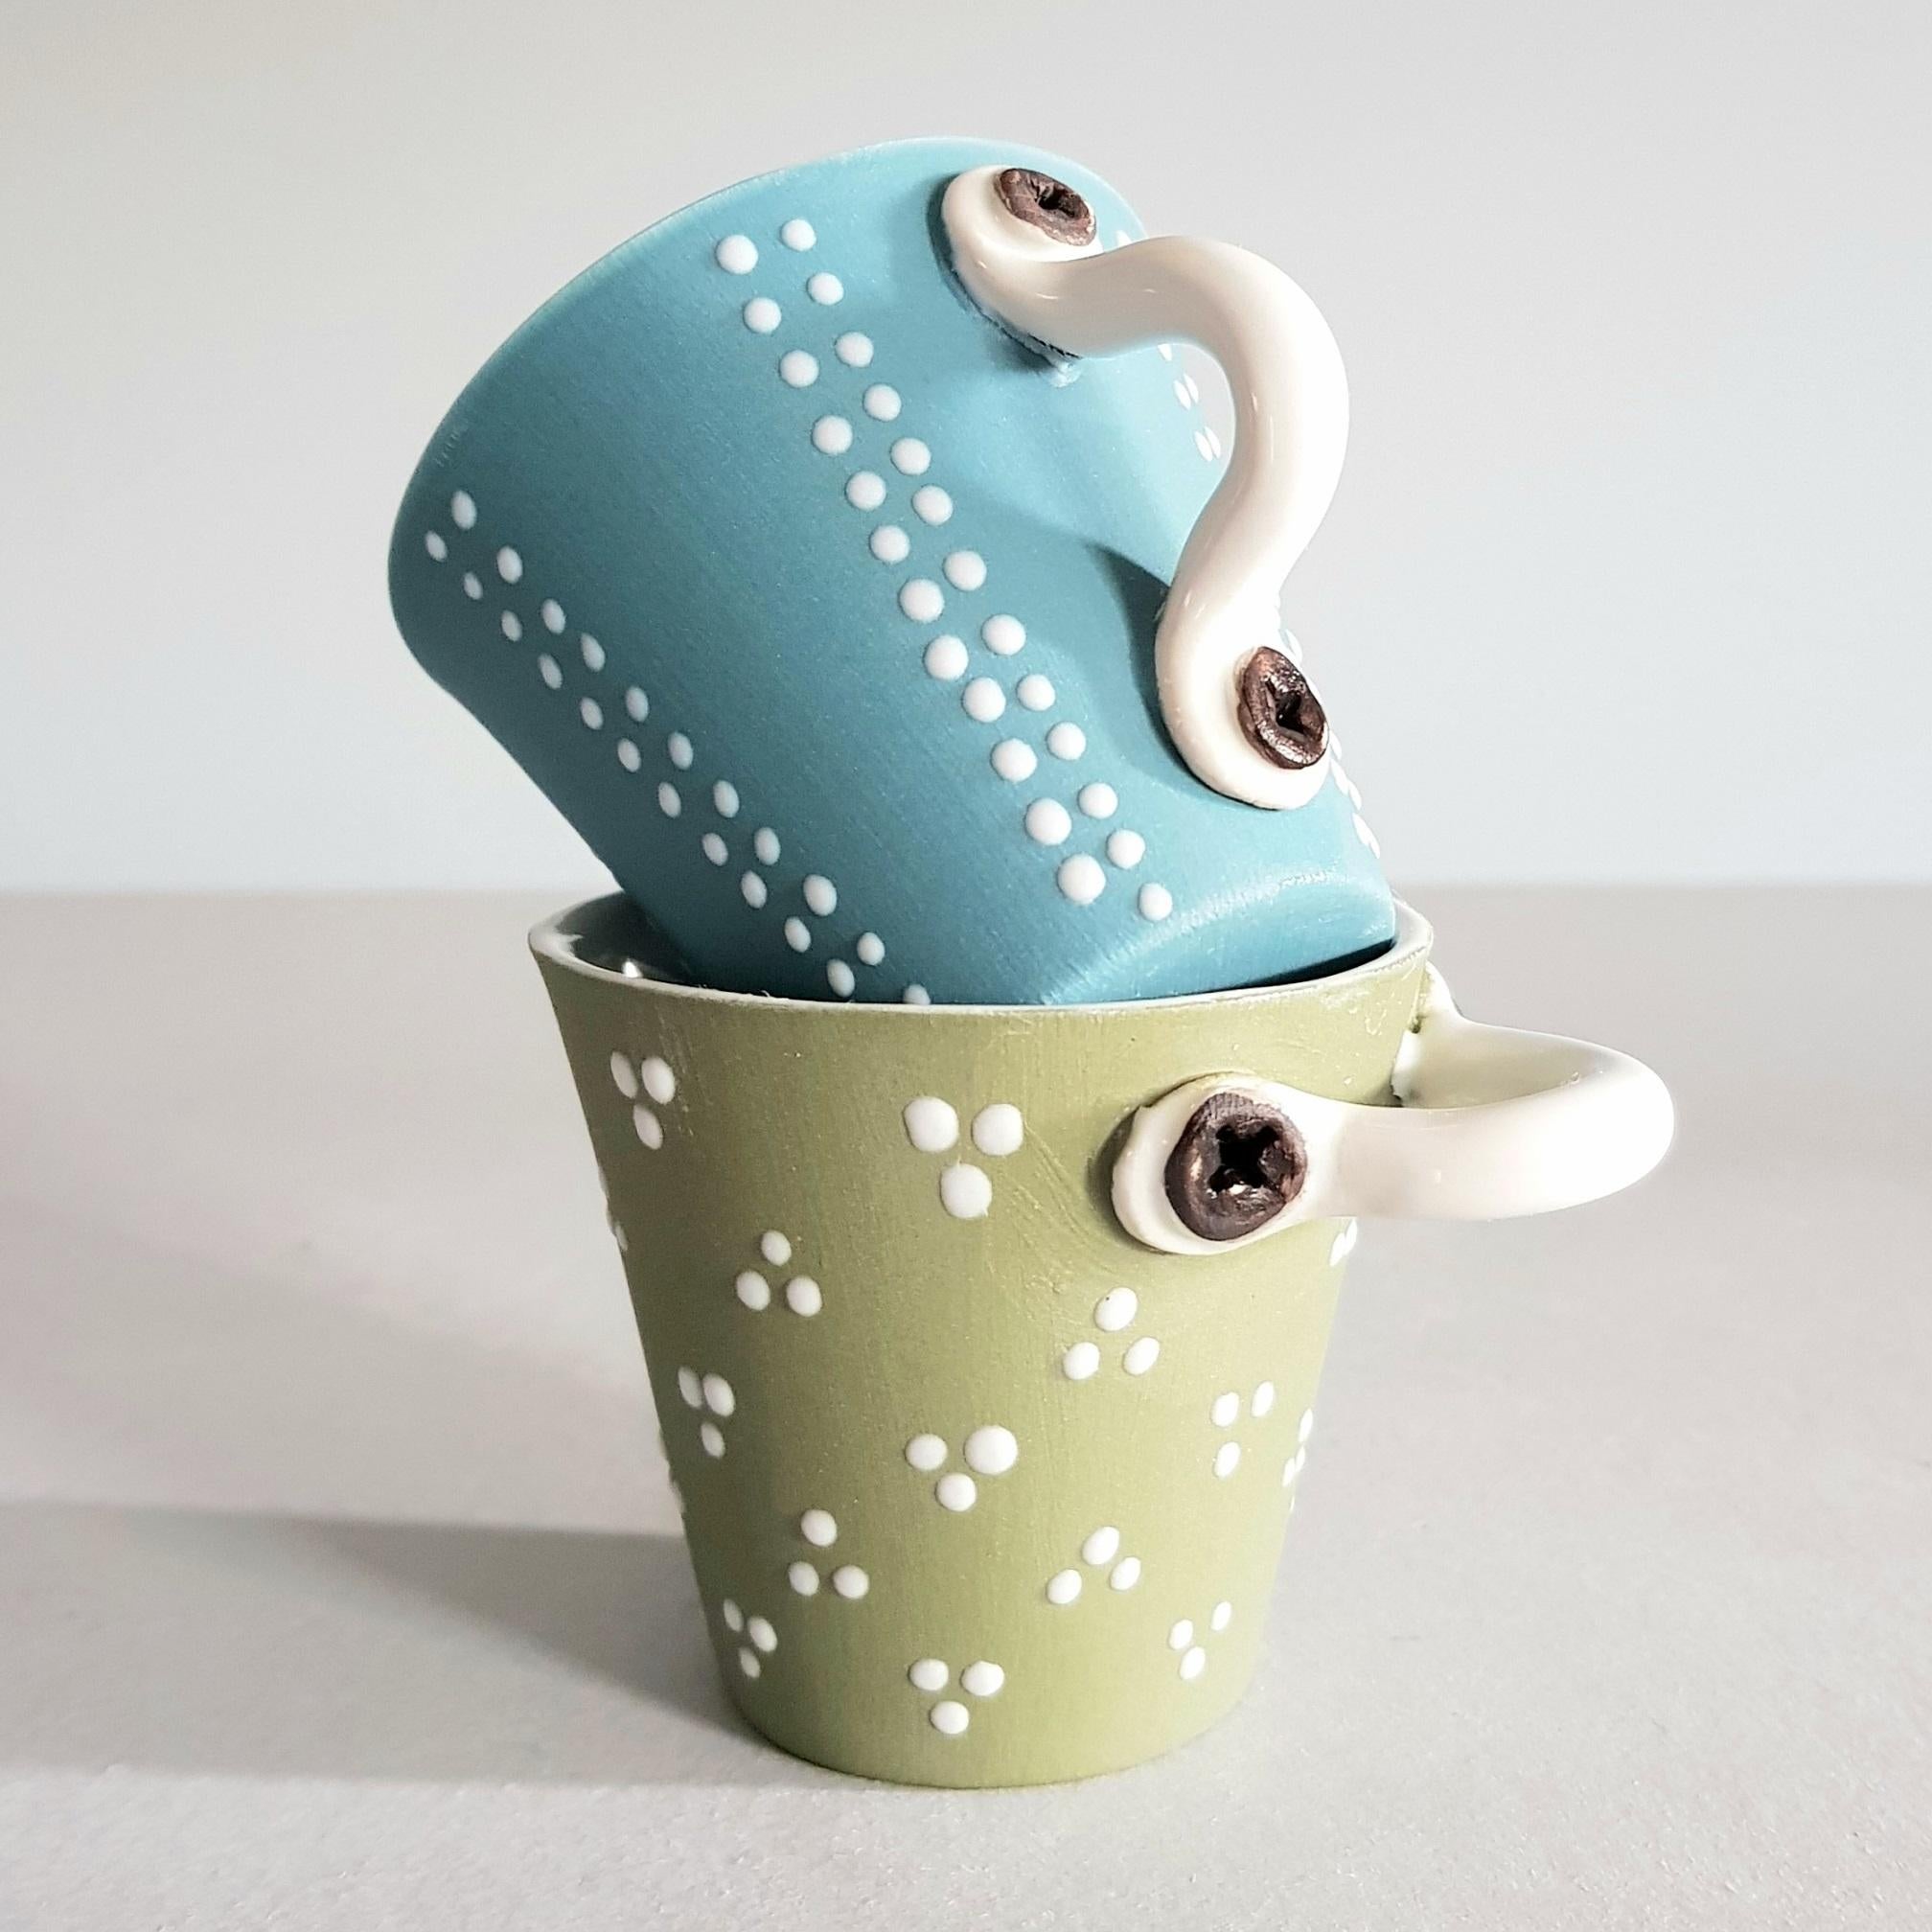 Hand-Crafted Amélie Tableware and Serveware, Coffee Cups, Handmade in Italy 2021 For Sale